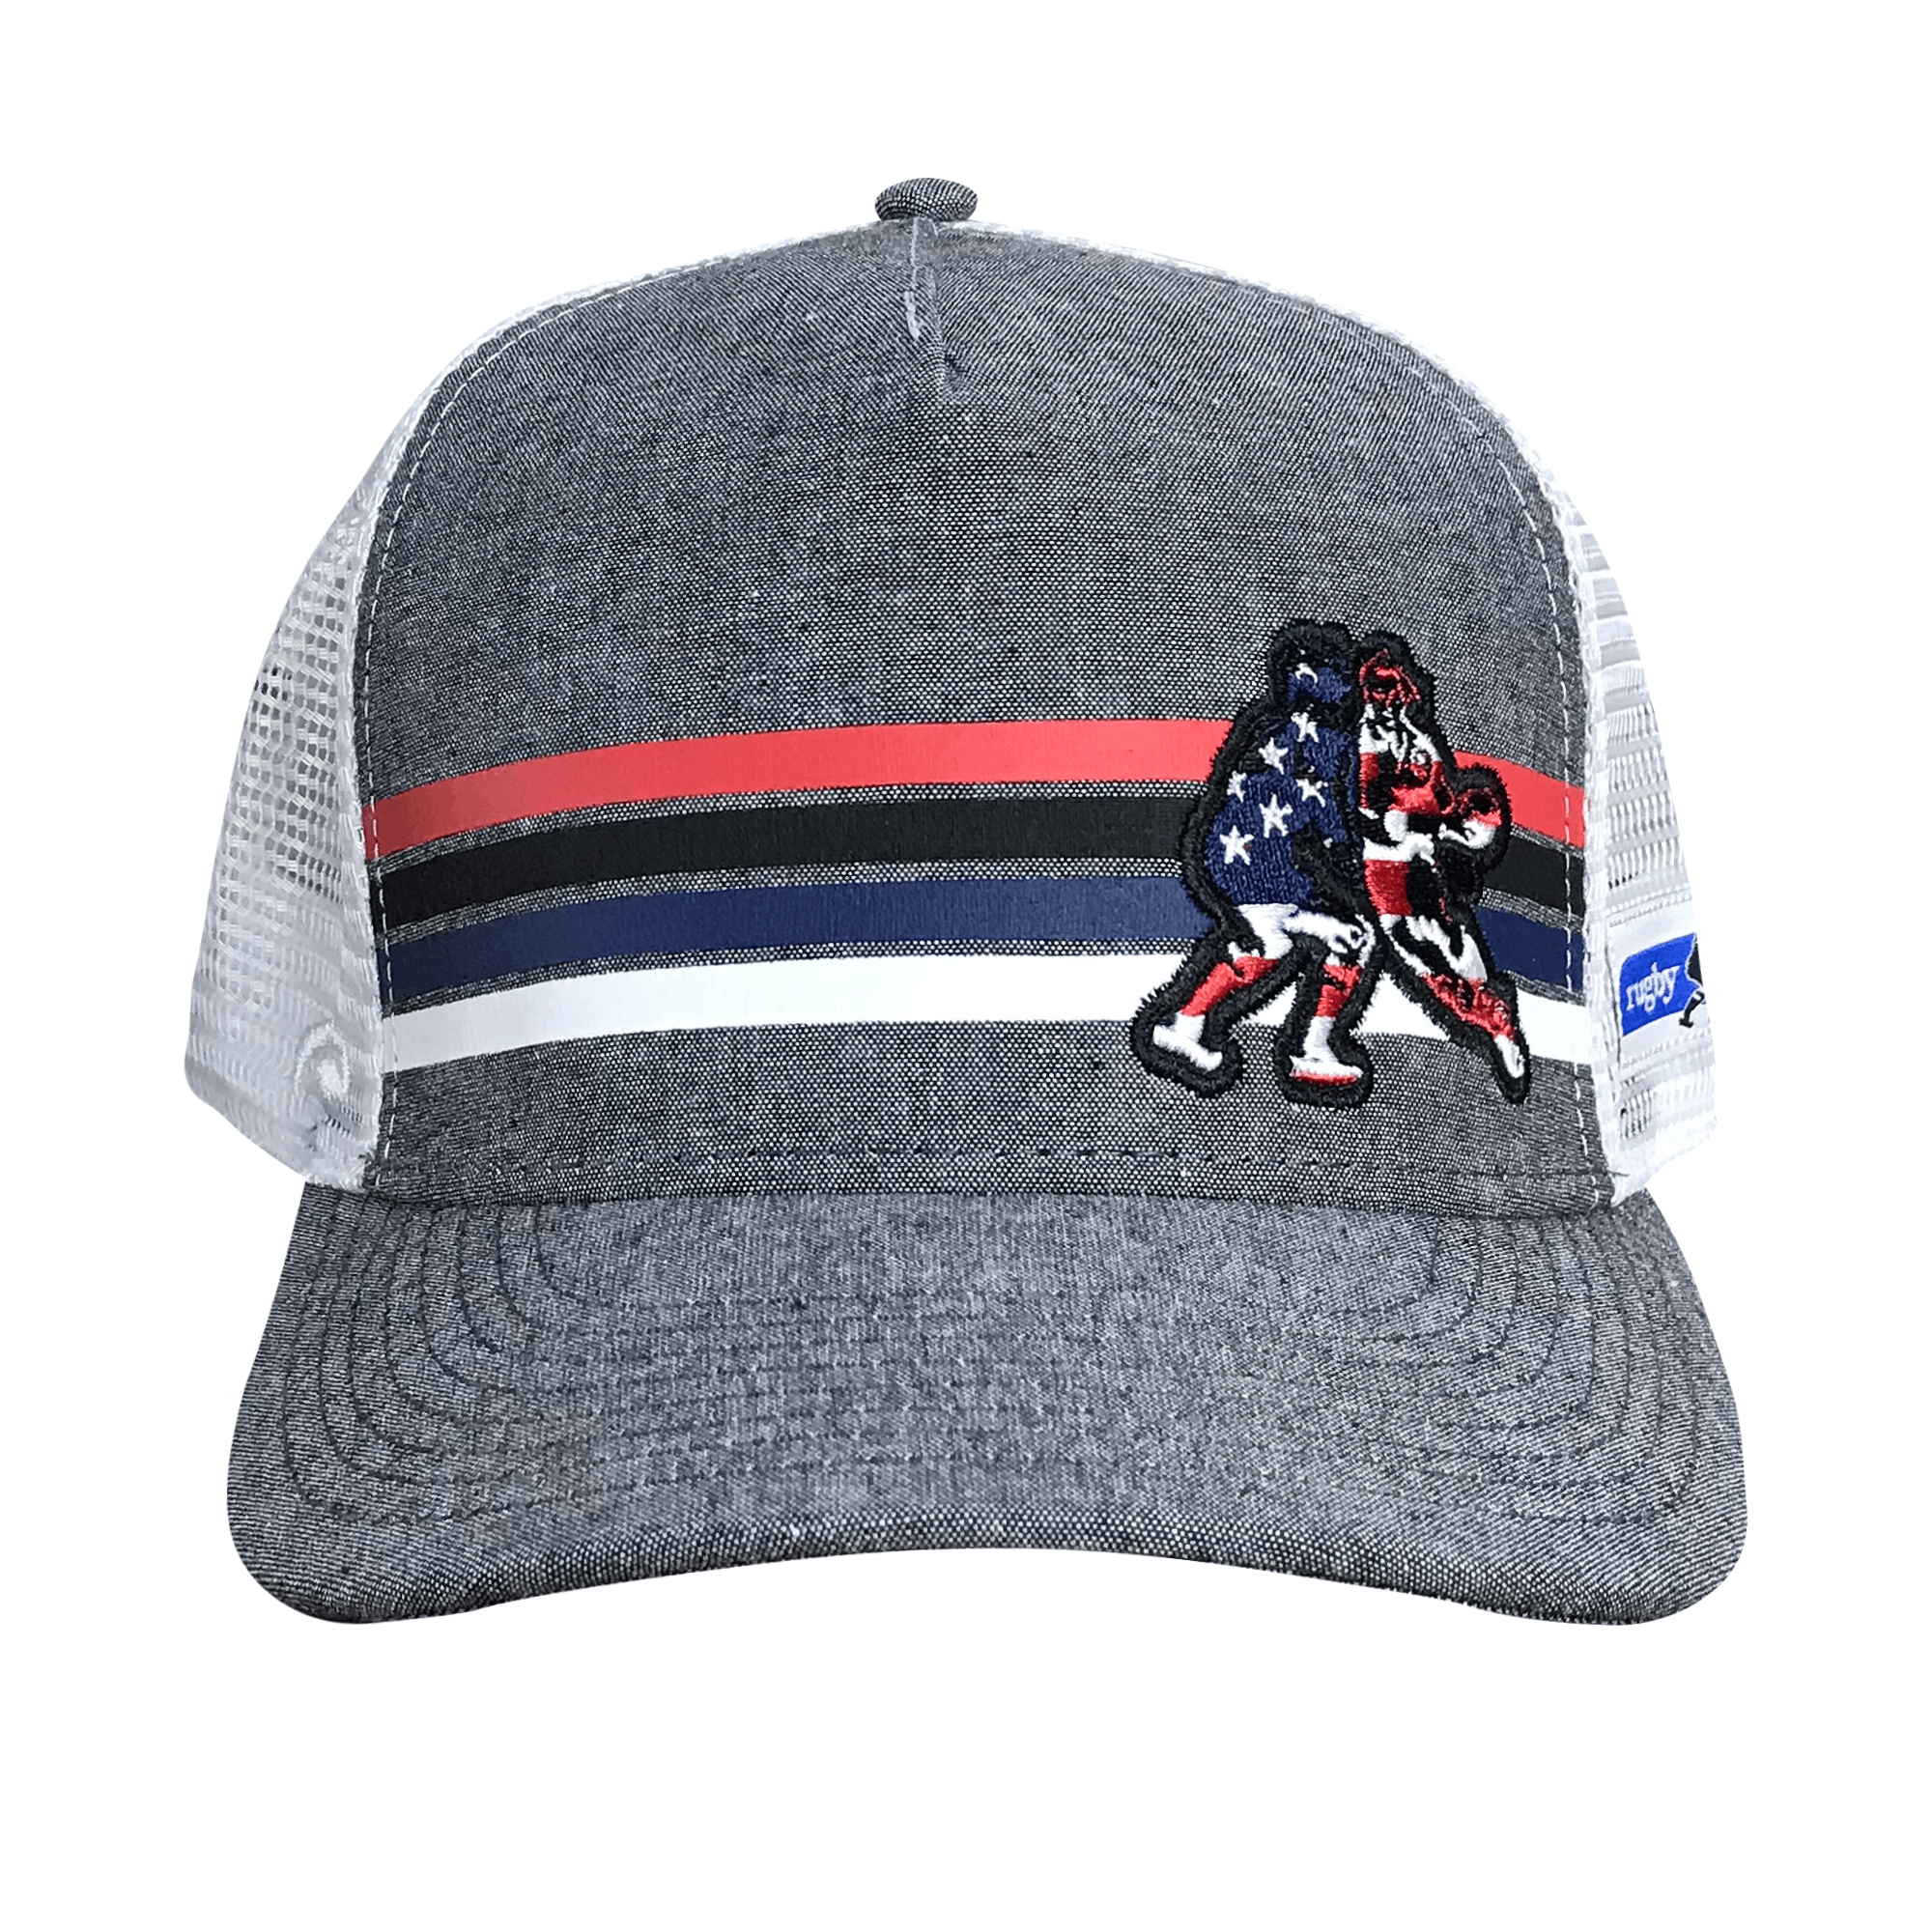 Rugby Imports Rugby Imports USA Stripe Trucker Hat